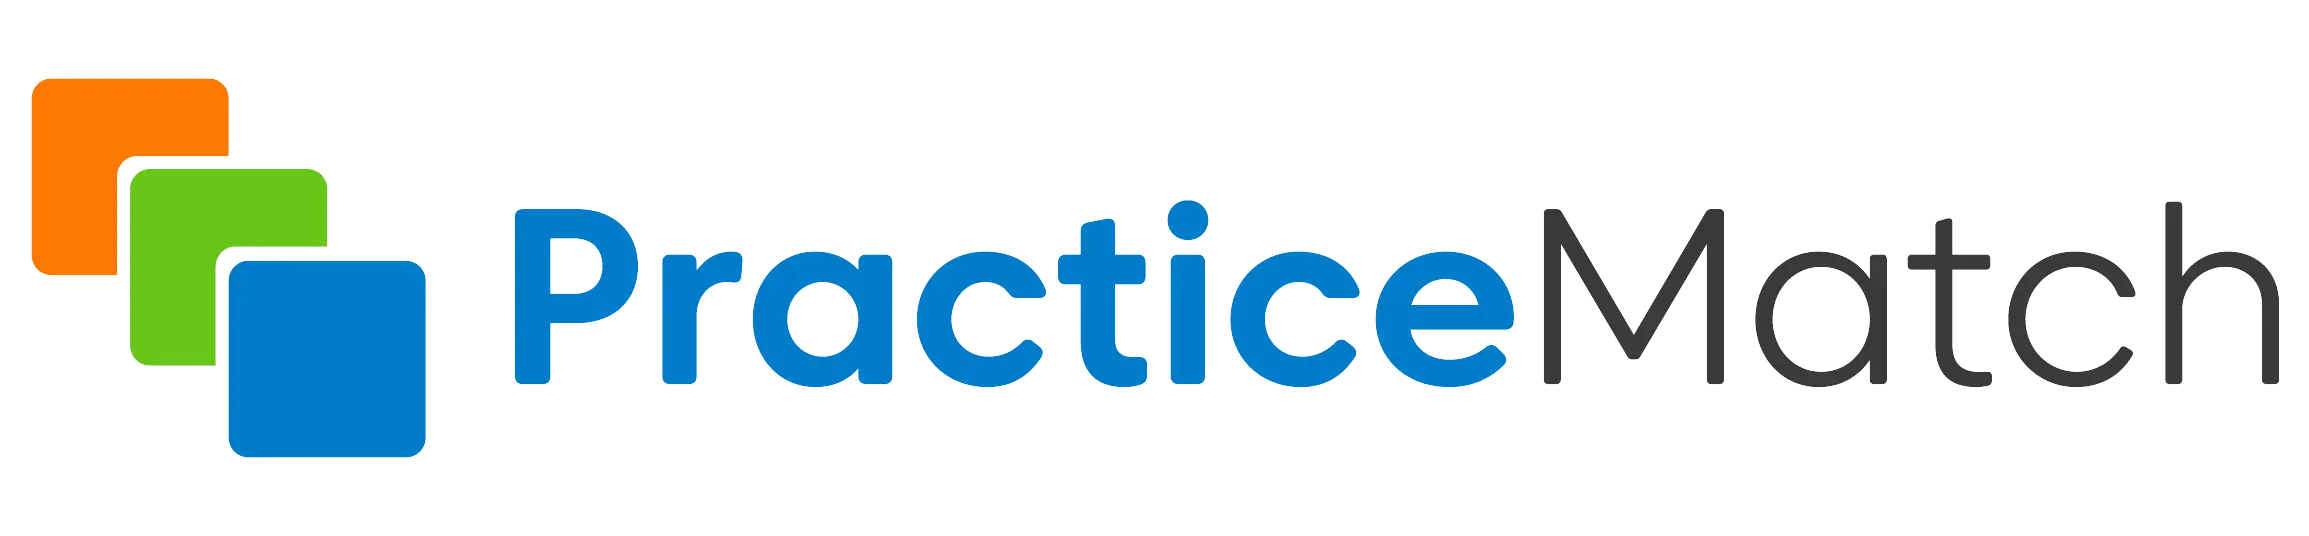 Search jobs at PracticeMatch